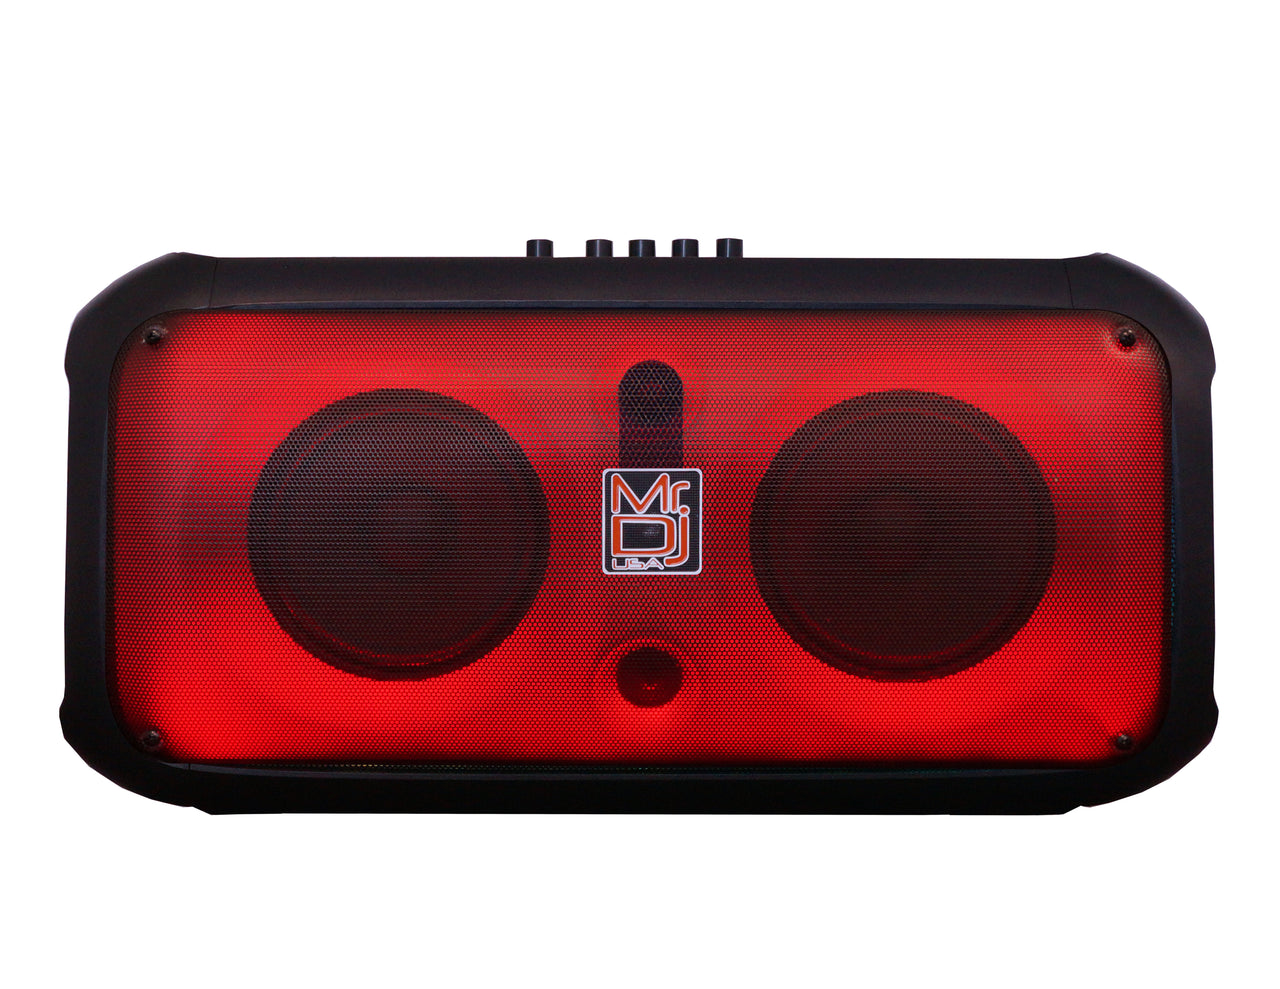 MR DJ FIRE-FLAME 6.5" X 2 Rechargeable Portable Bluetooth Karaoke Speaker with Party Flame Lights Microphone TWS USB FM Radio